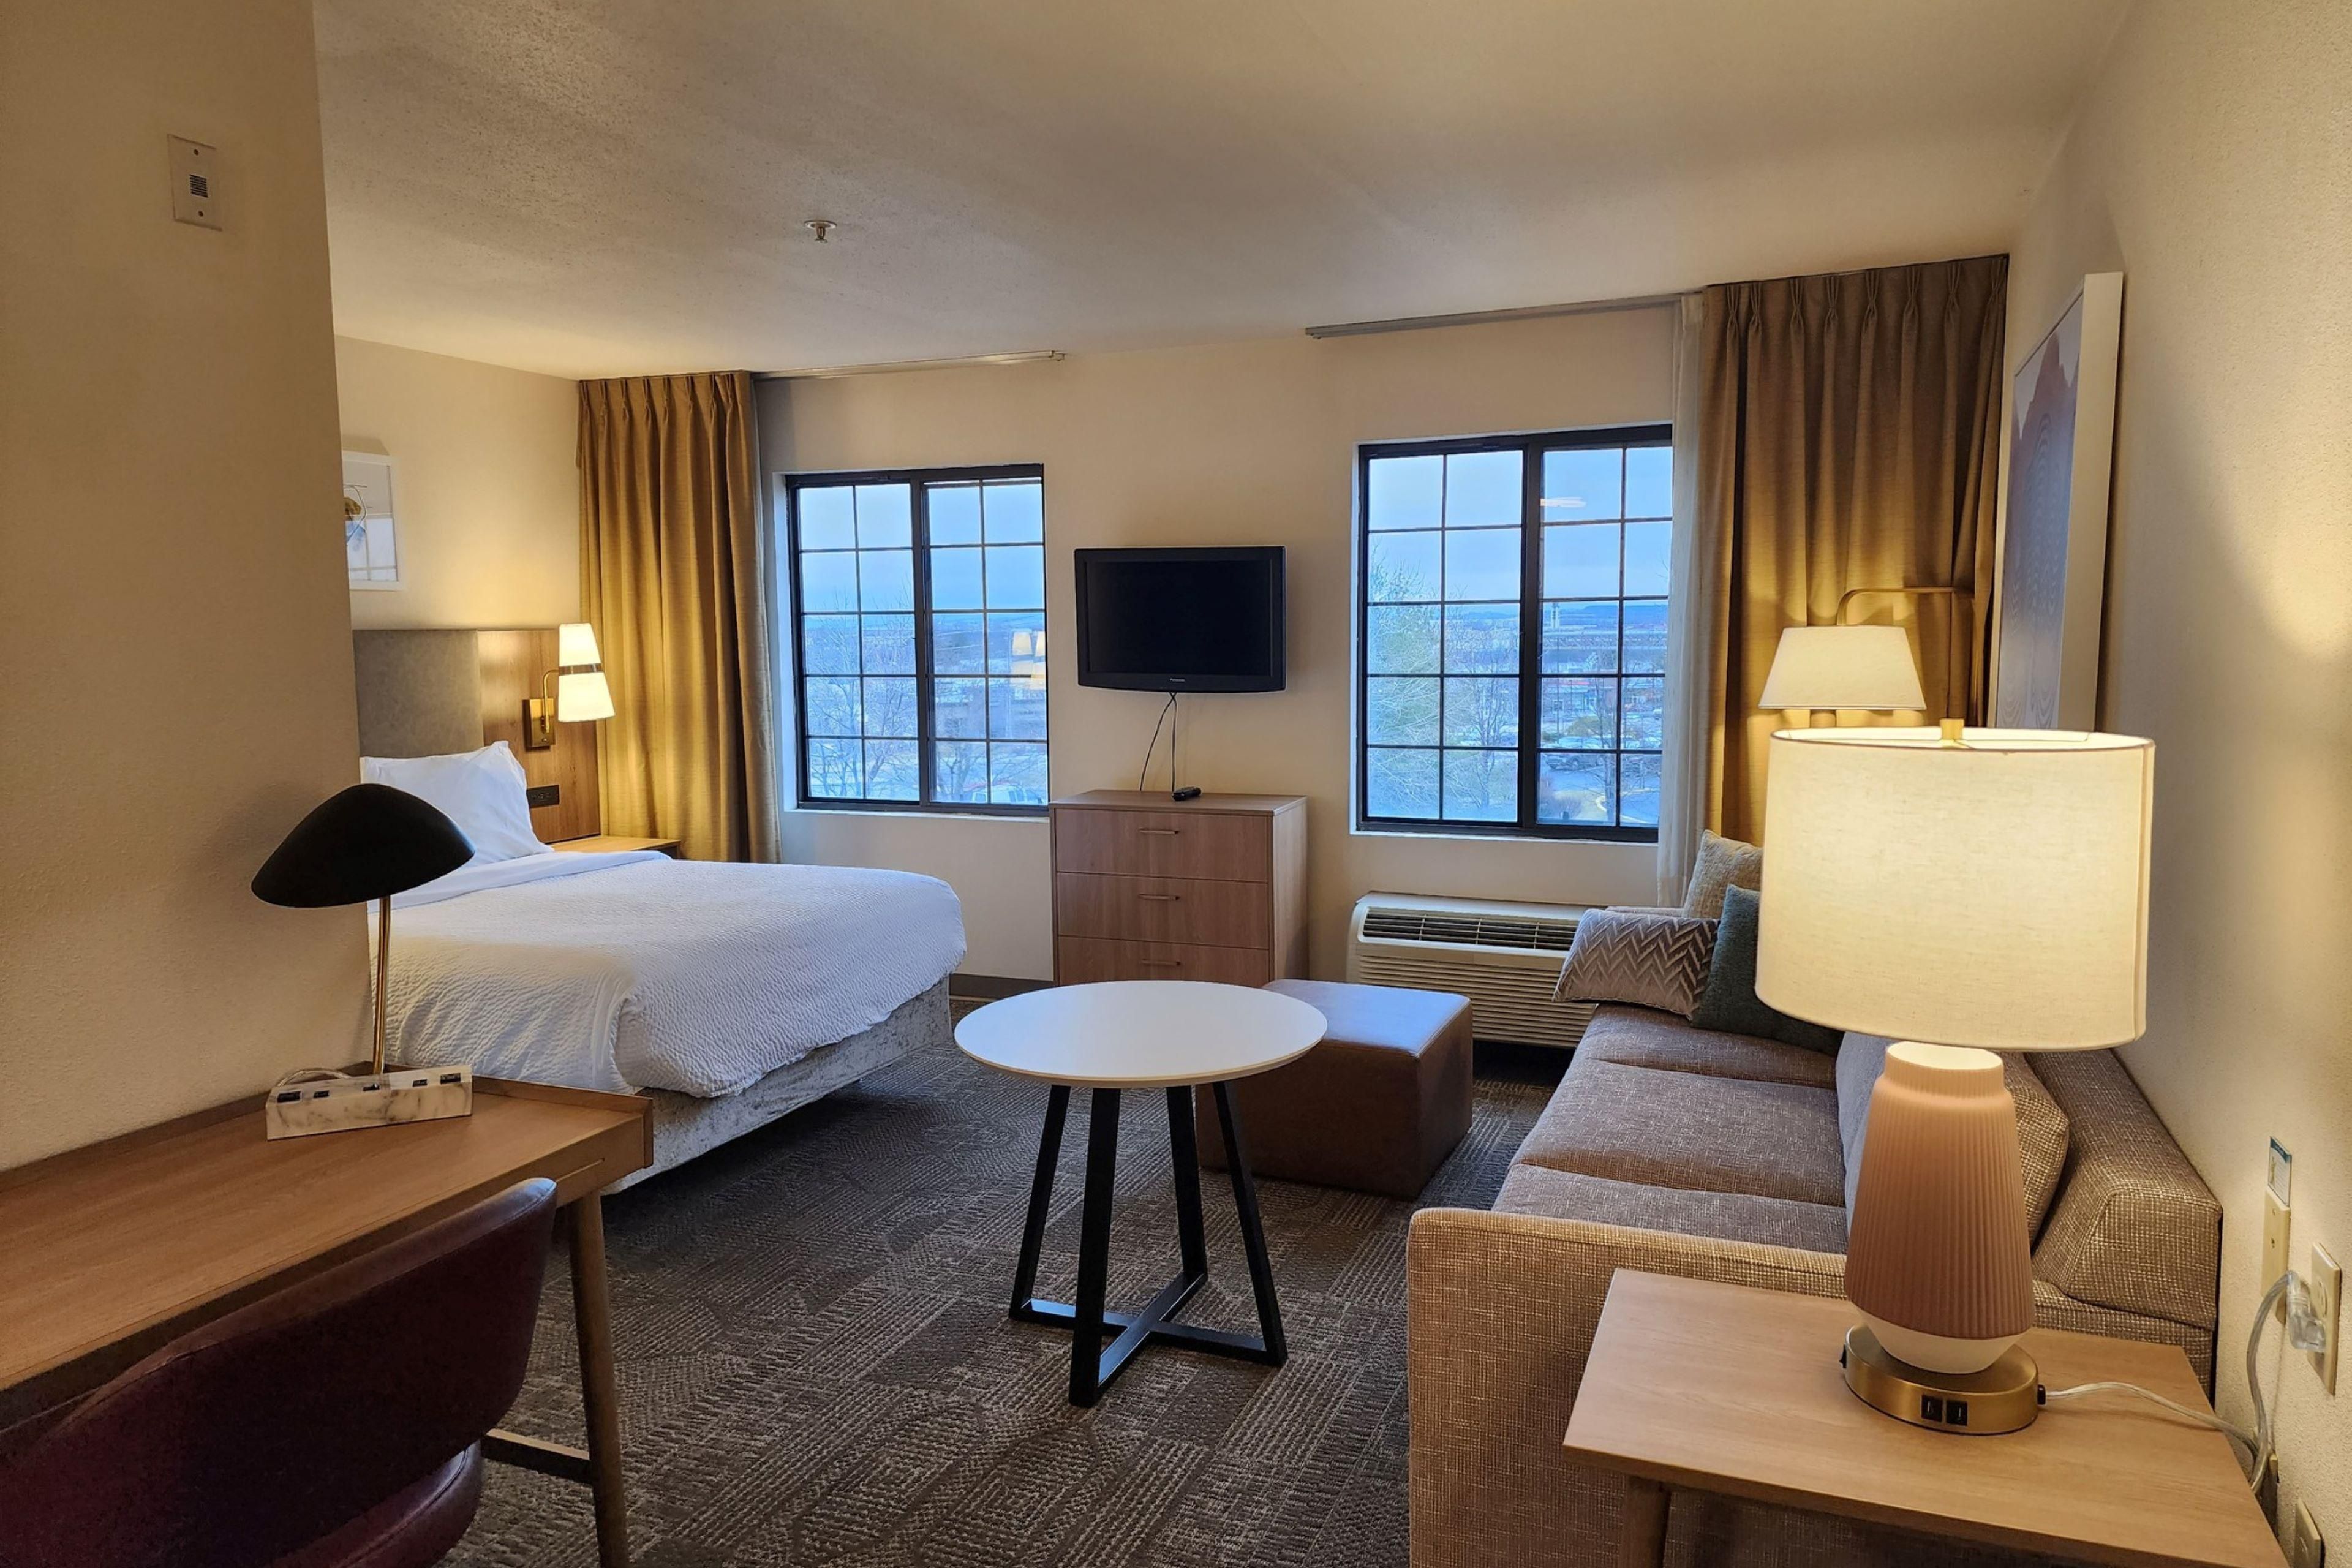 Newly Upgraded Full Guest Room & Public Areas featuring the latest IHG Design. Upcoming Refreshed Hotel Photography Coming Soon. We are excited to share these changes with our Guests, Clients & Community Partners!